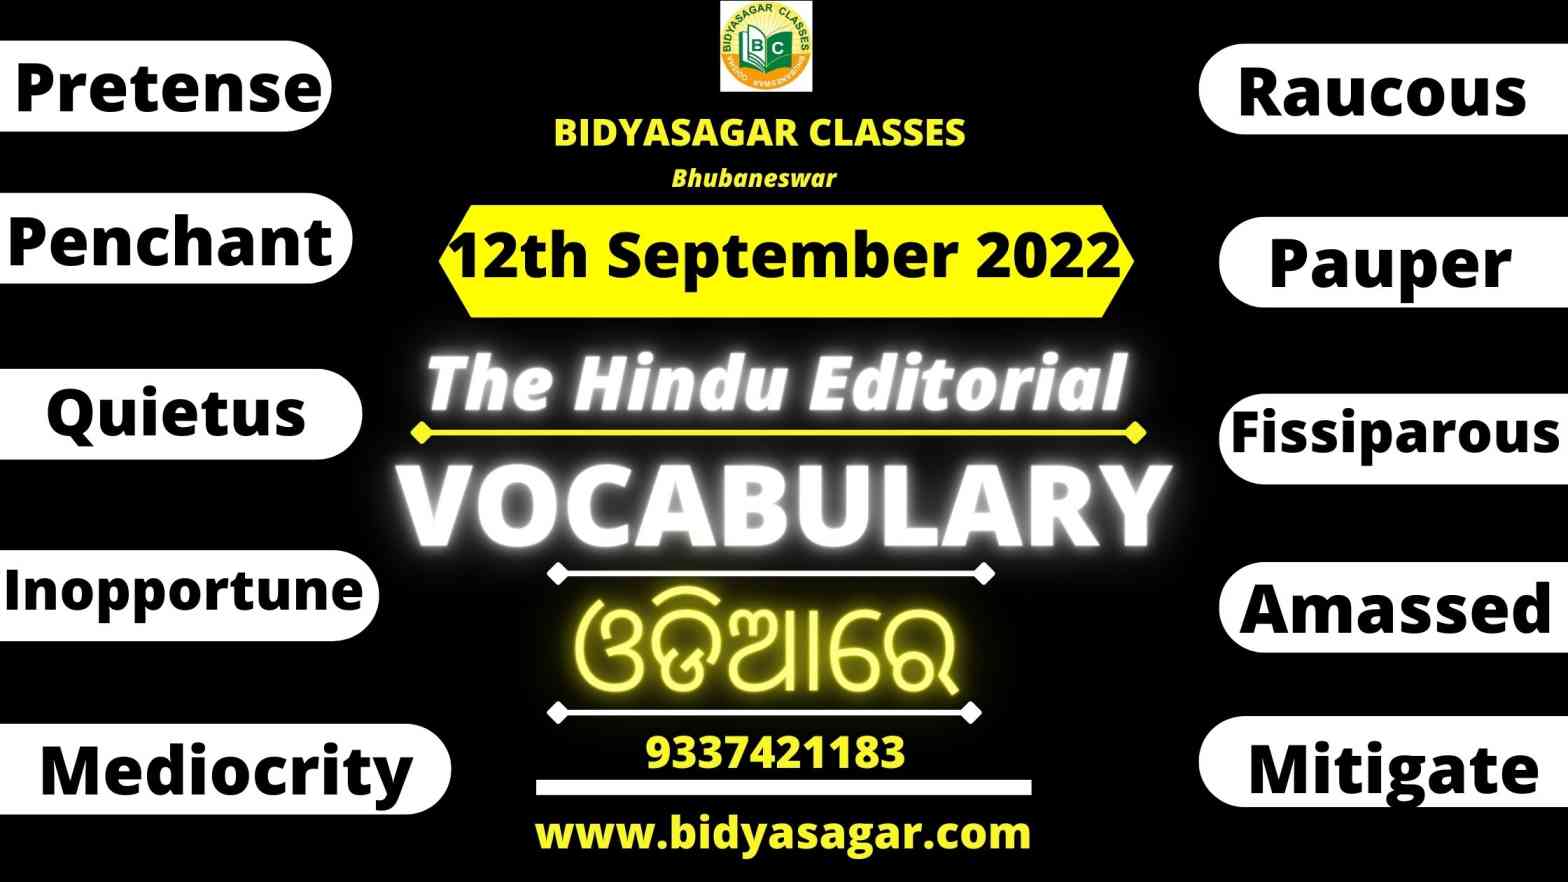 The Hindu Editorial Vocabulary of 12th September 2022